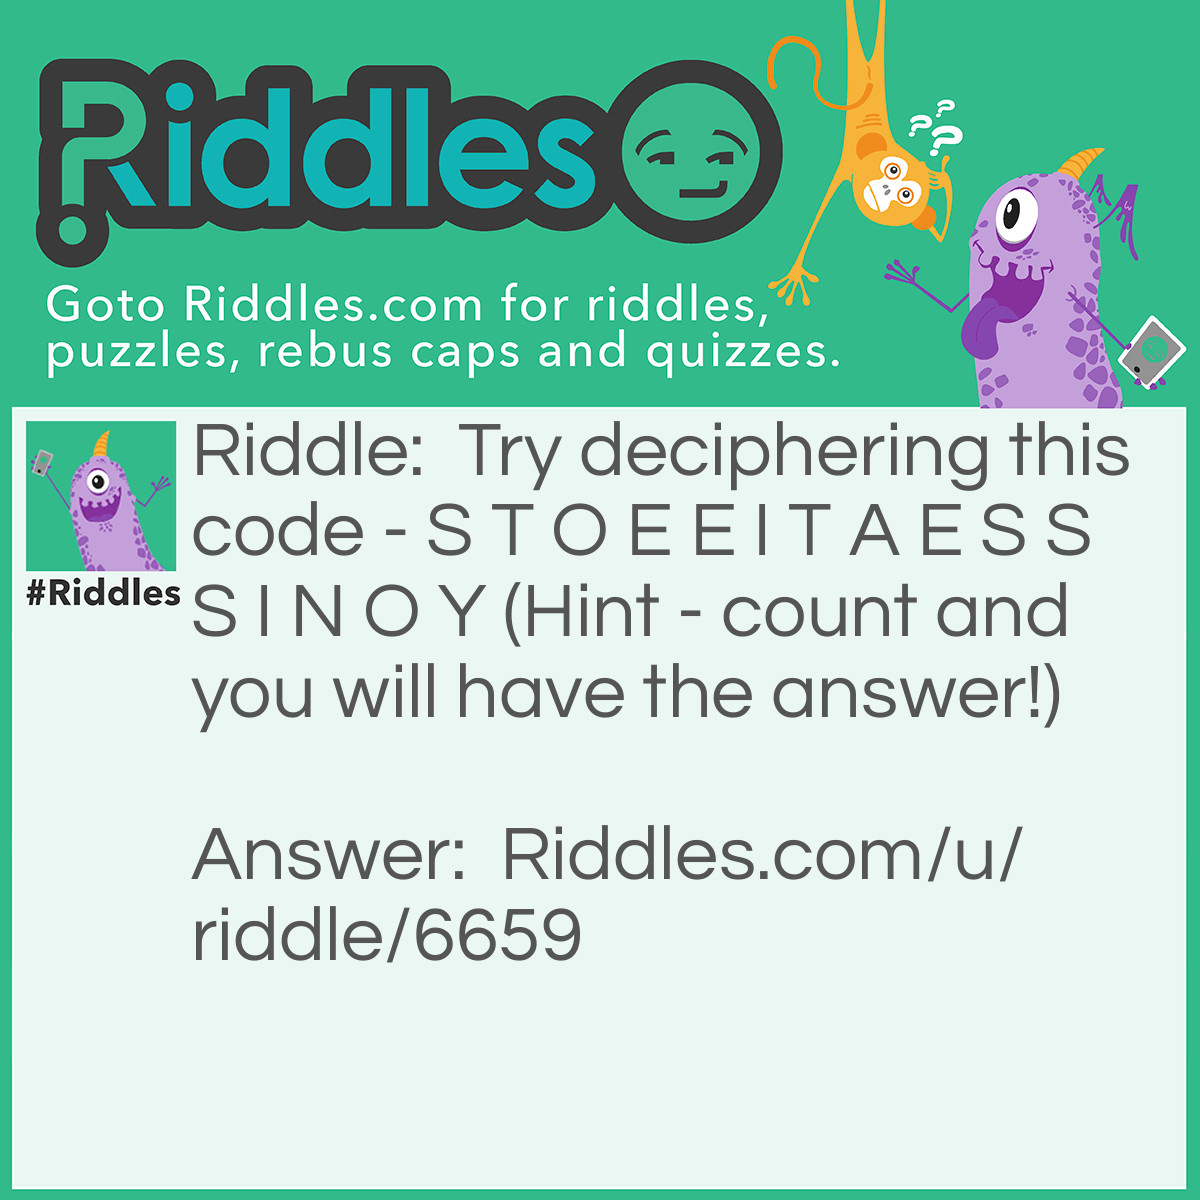 Riddle: Try deciphering this code - S T O E E I T A E S S S I N O Y (Hint - count and you will have the answer!) Answer: Did you count the number of letters? There are 16 of them. Divide them in groups of 4. Then, put each group below the other, and read column wise. Here's how you do it... S T O E E I T A E S S S I N O Y The answer to the code is See it is not so easy.